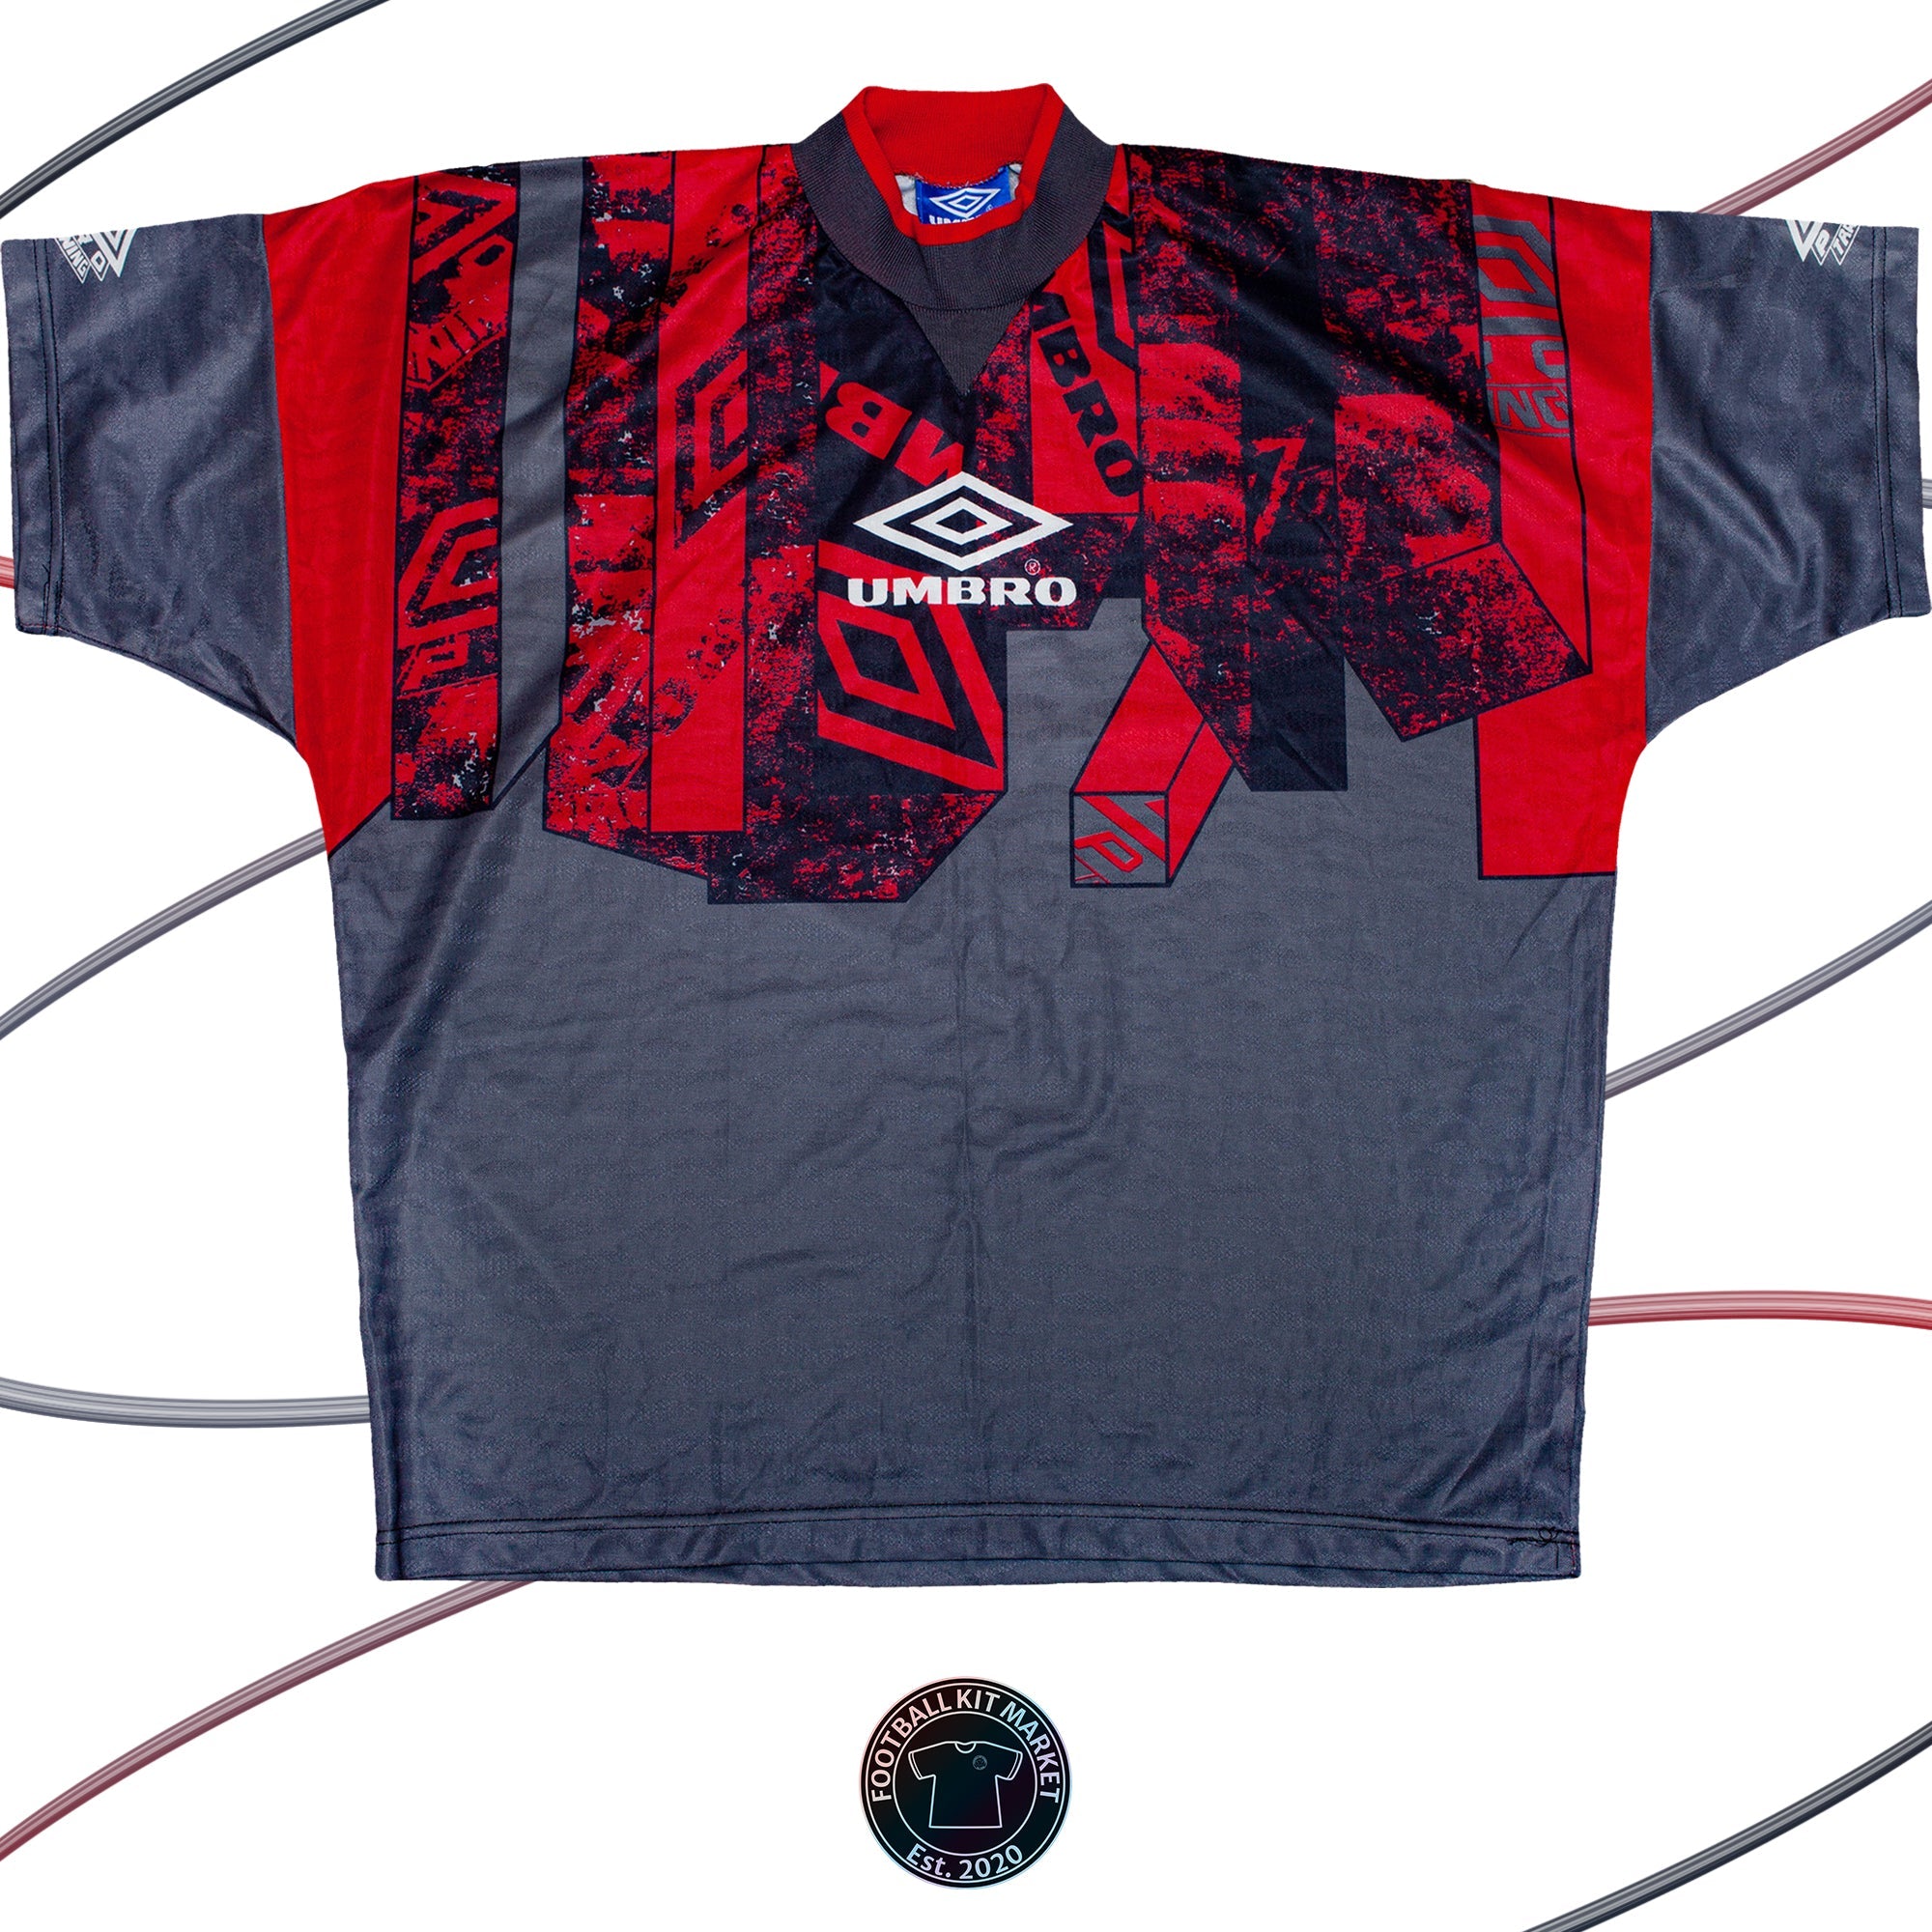 Genuine UMBRO Casual Wear - XL - Product Image from Football Kit Market